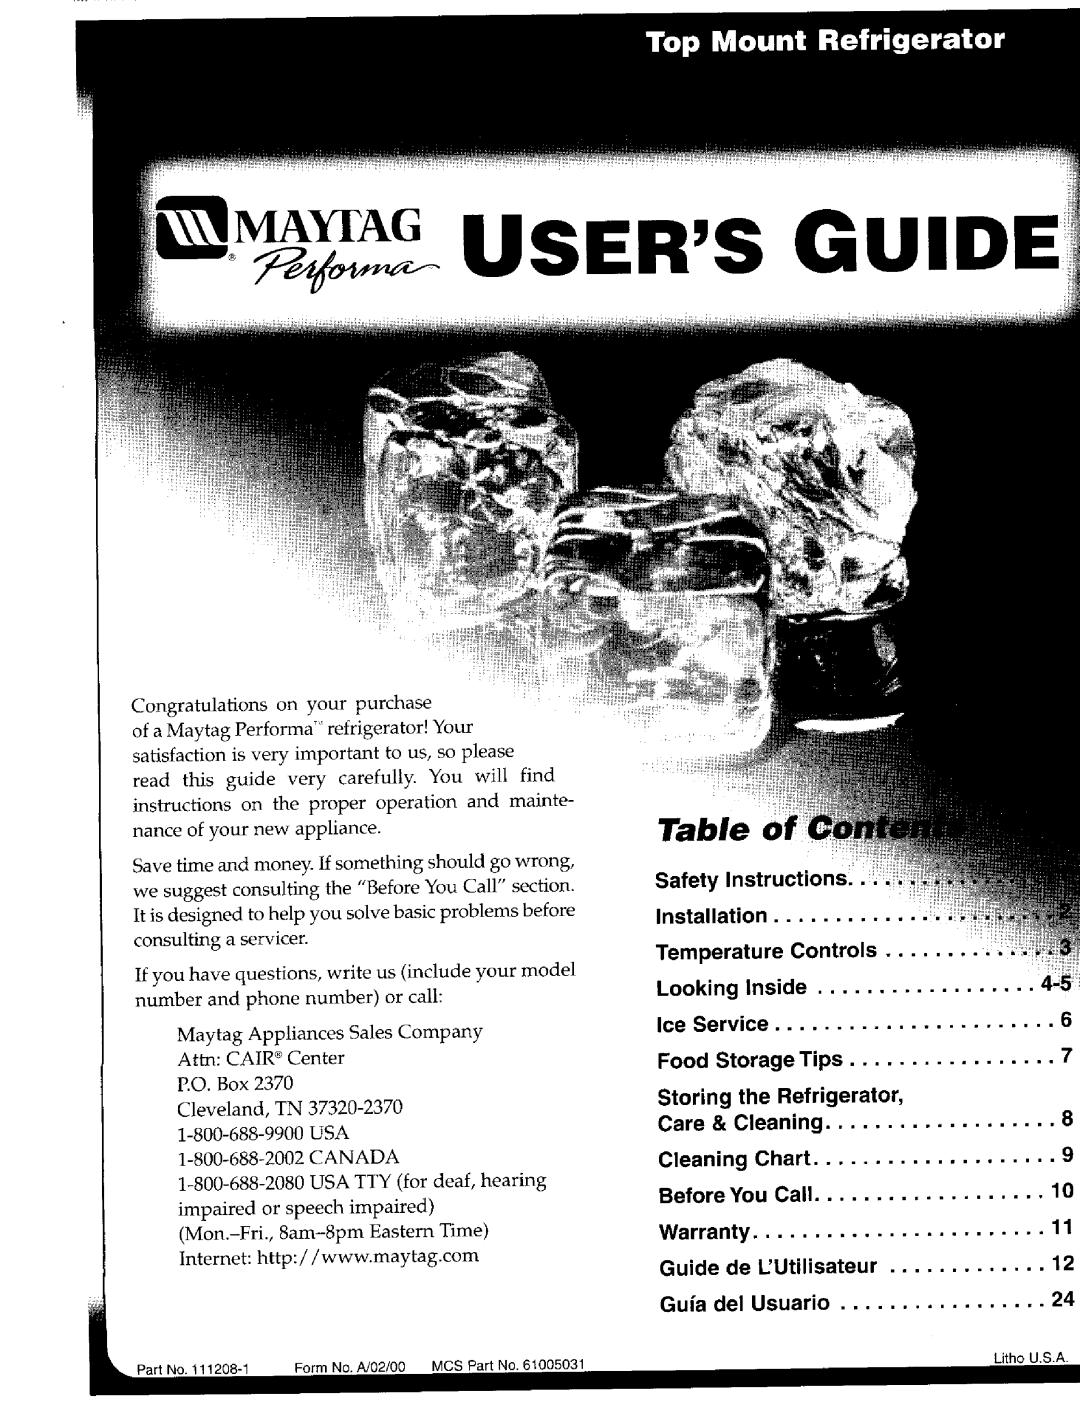 Maytag 111208-1 warranty Safety Instructions, Temperature Controls, Storingthe Refrigerator, Table of, Installation 